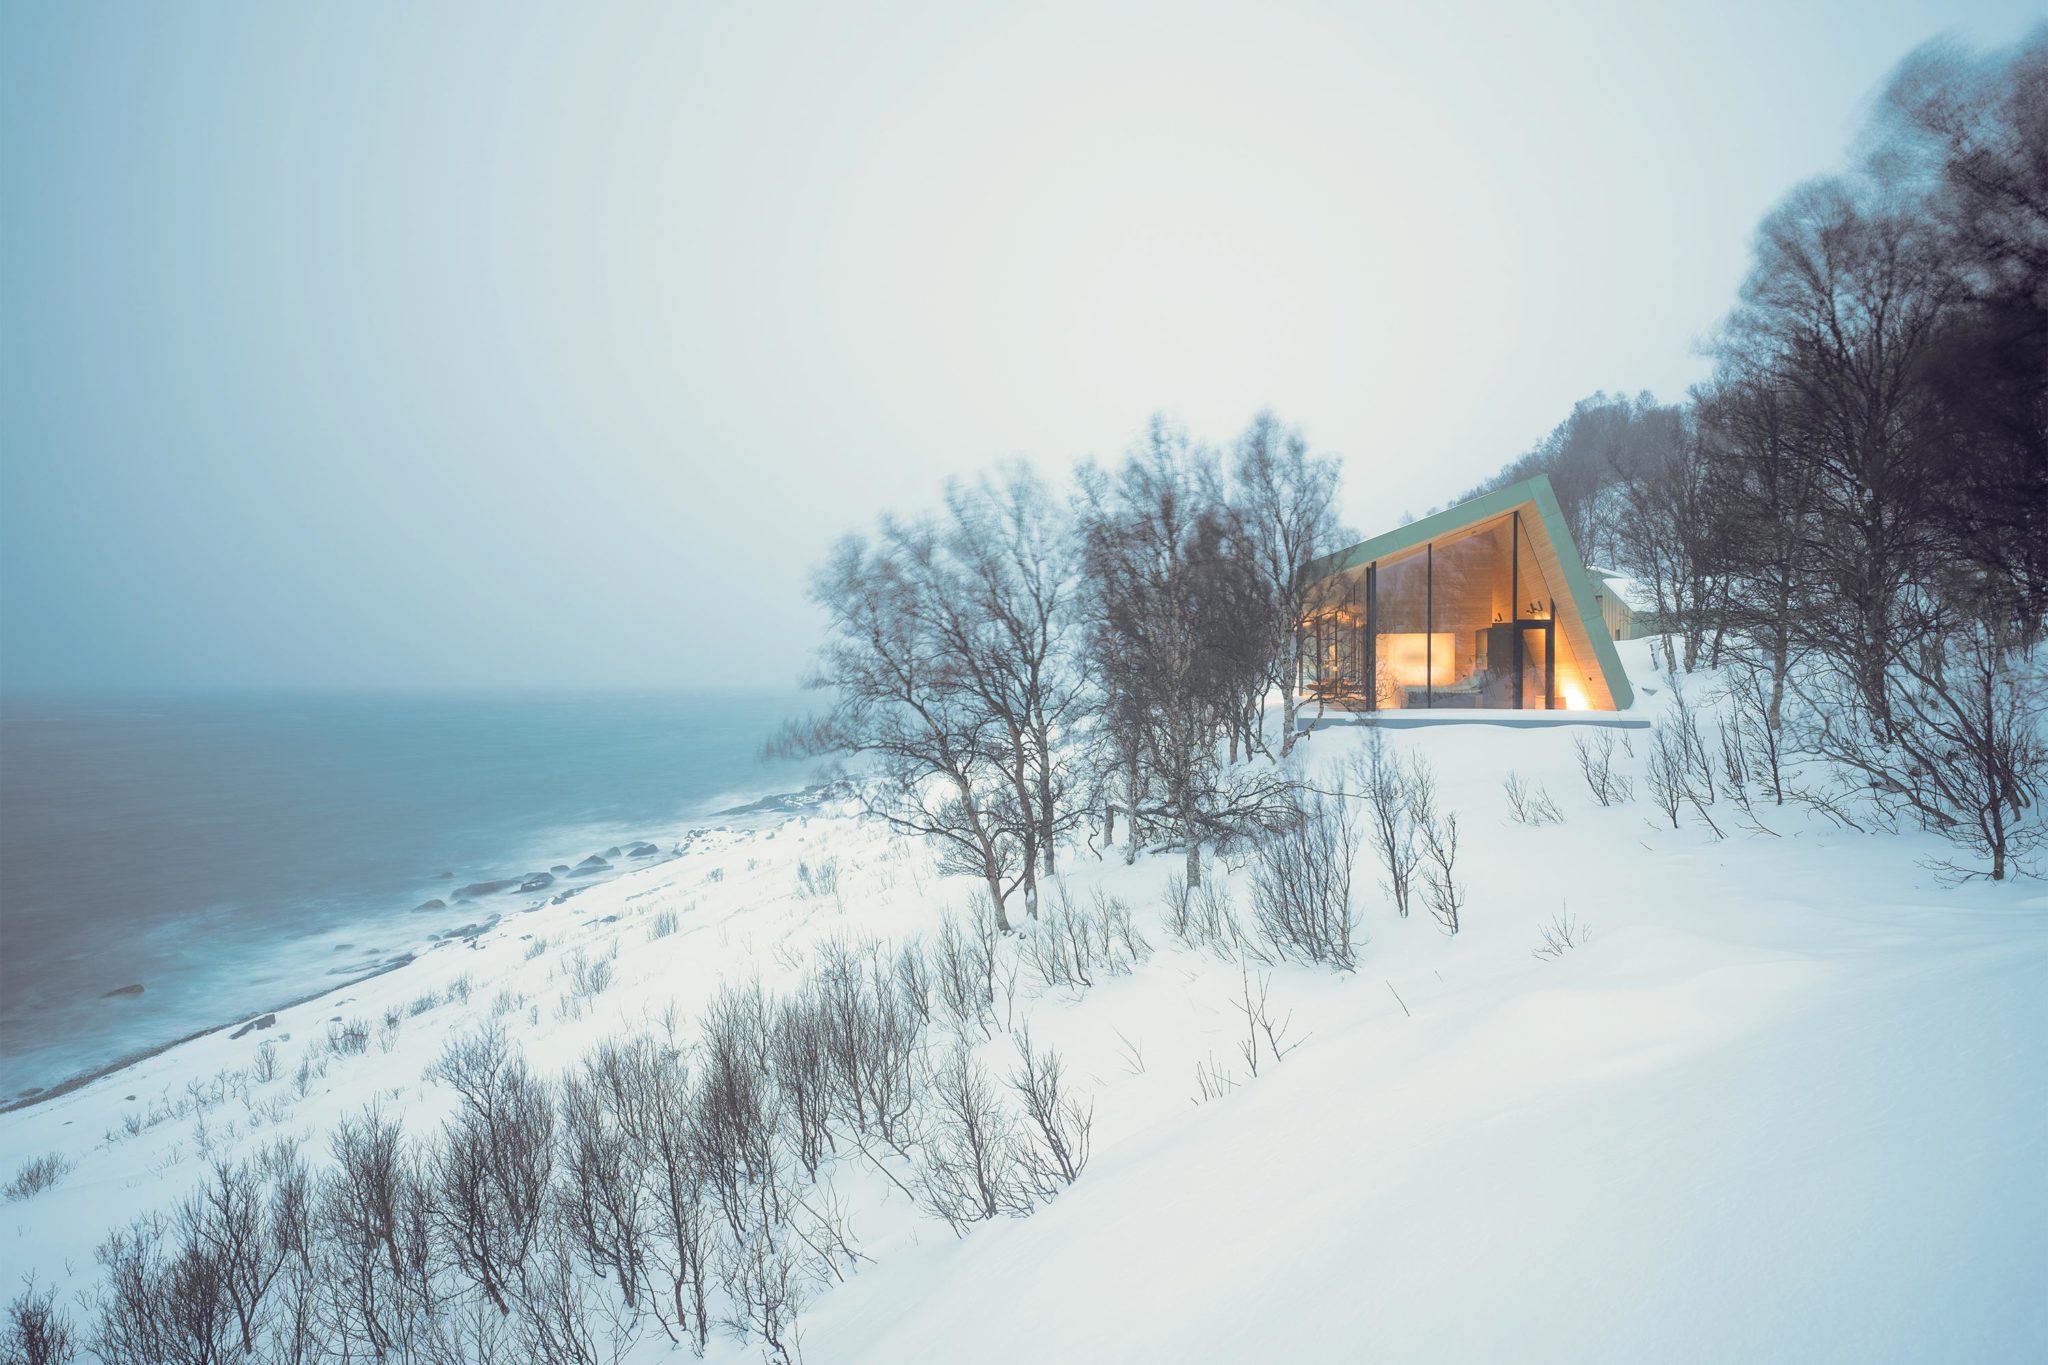 A cozy, cool cabin nestled in the mountain wall during winter with a view towards the sea.